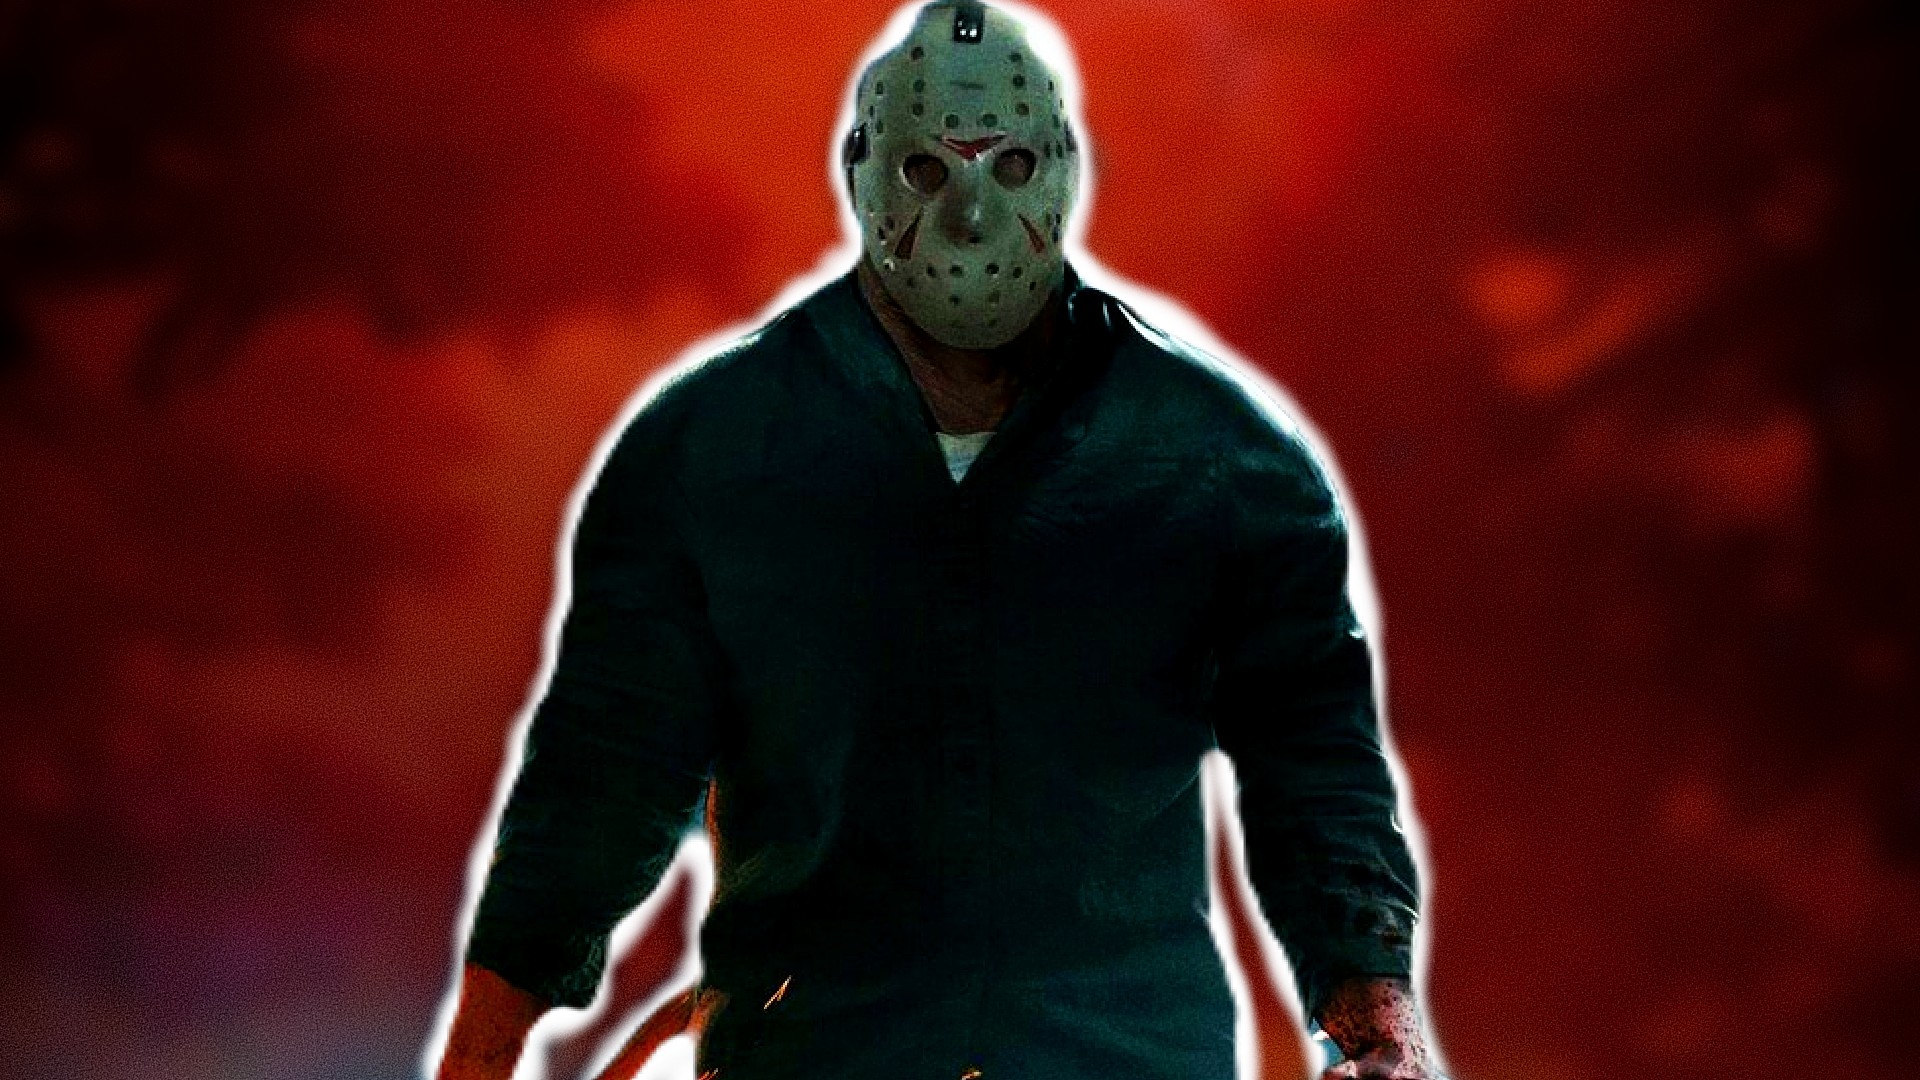 A New Friday The 13th Game Is In Development With Composer Harry Manfredini  : r/PS5